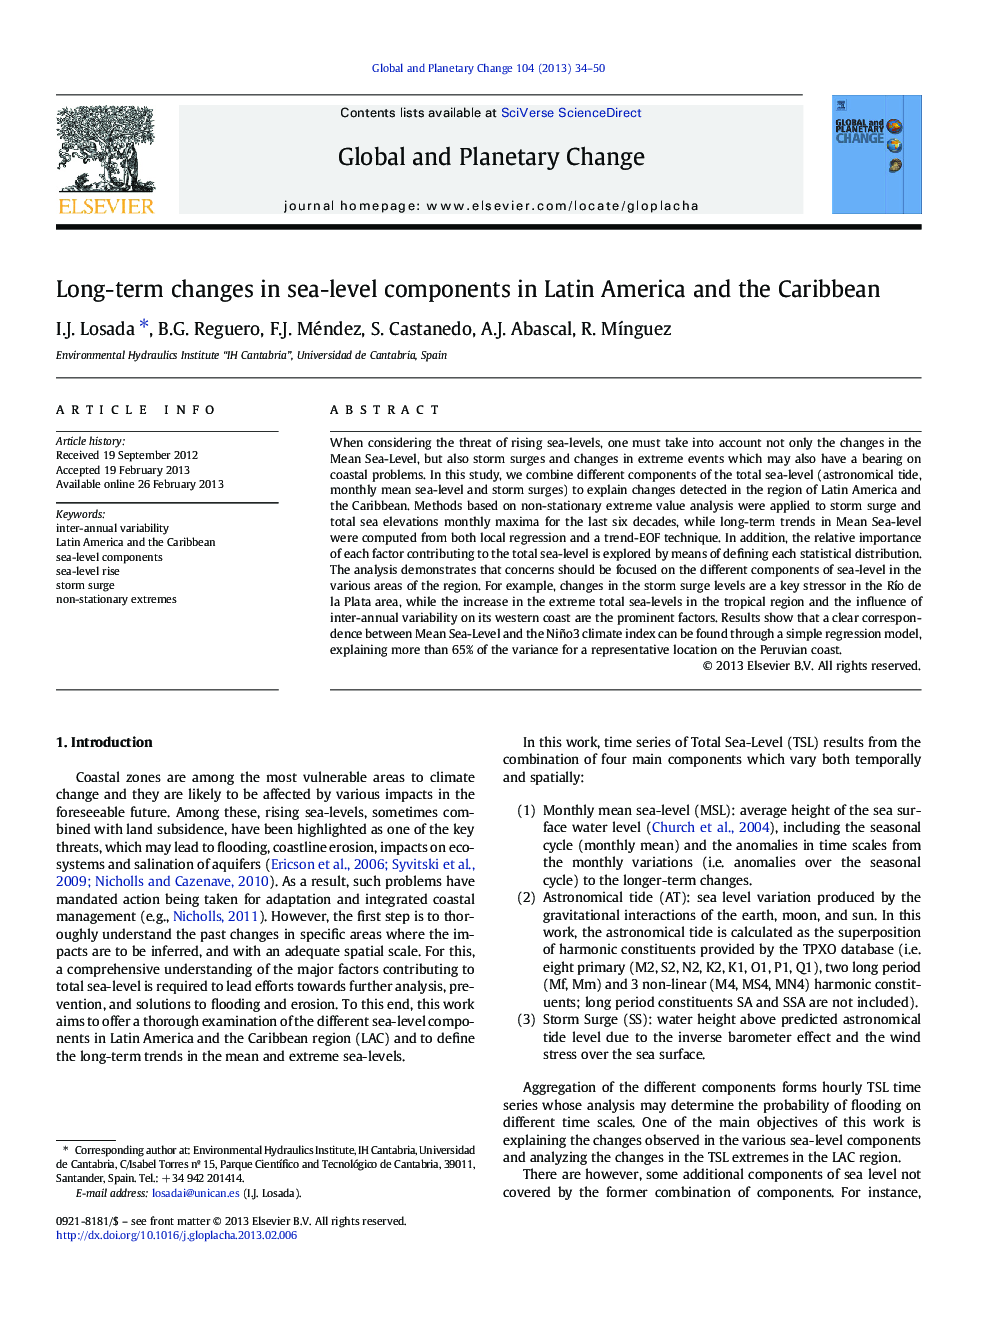 Long-term changes in sea-level components in Latin America and the Caribbean